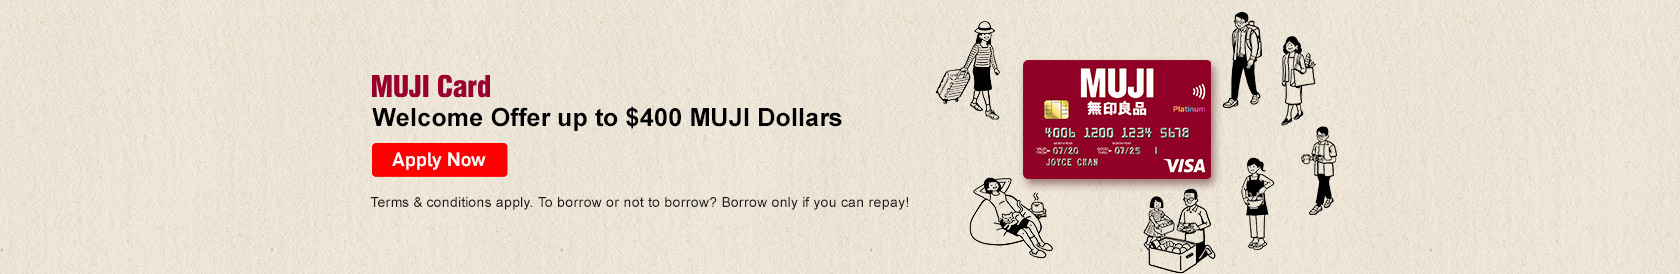 Apply now, MUJI Card - Enhanced welcome offer up to $400 MUJI Dollars and year-round offer at Café&Meal MUJI 